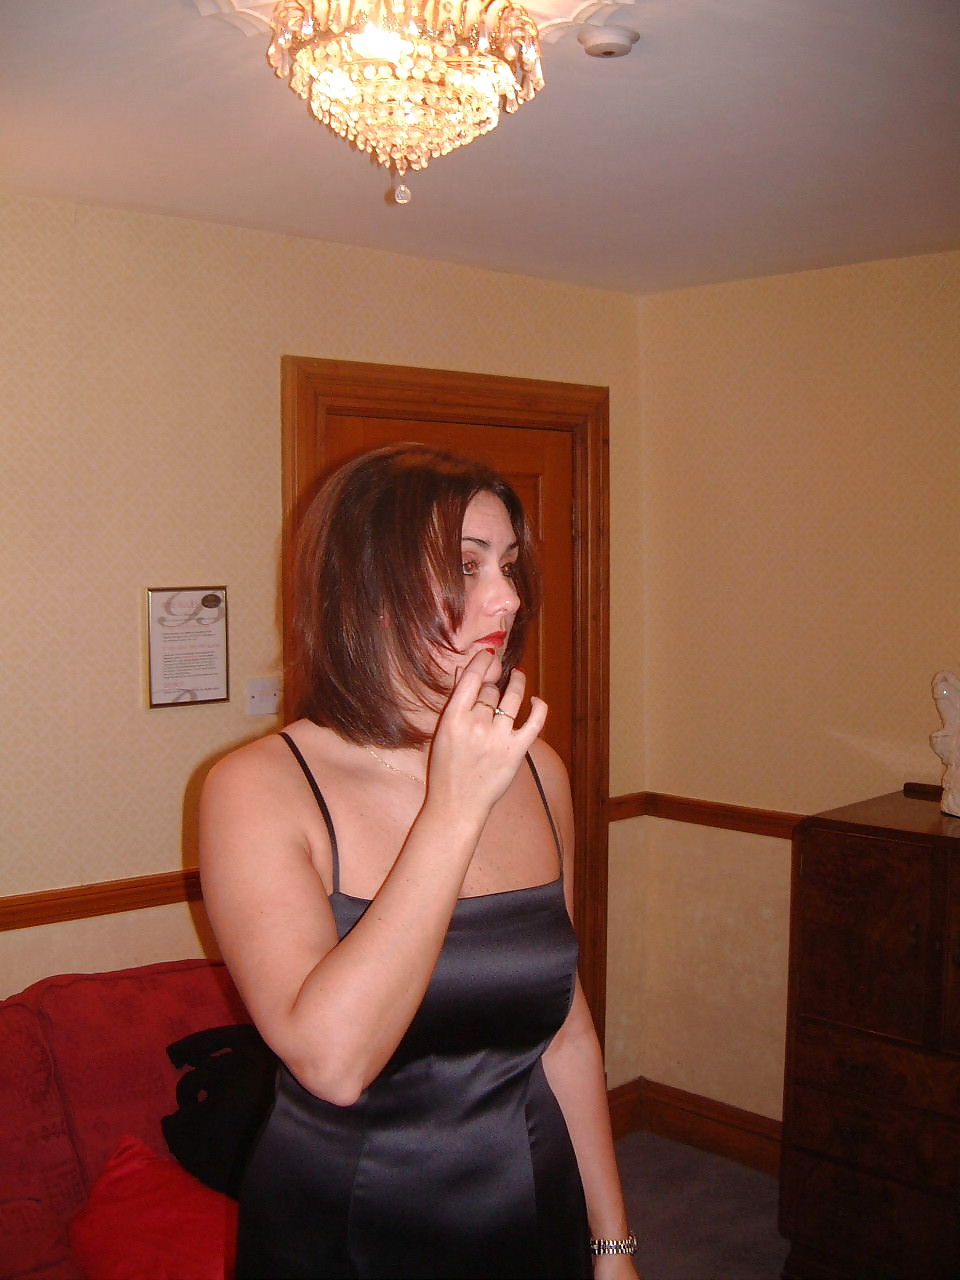 PRETTY, NICE AND HORNY - JANE adult photos